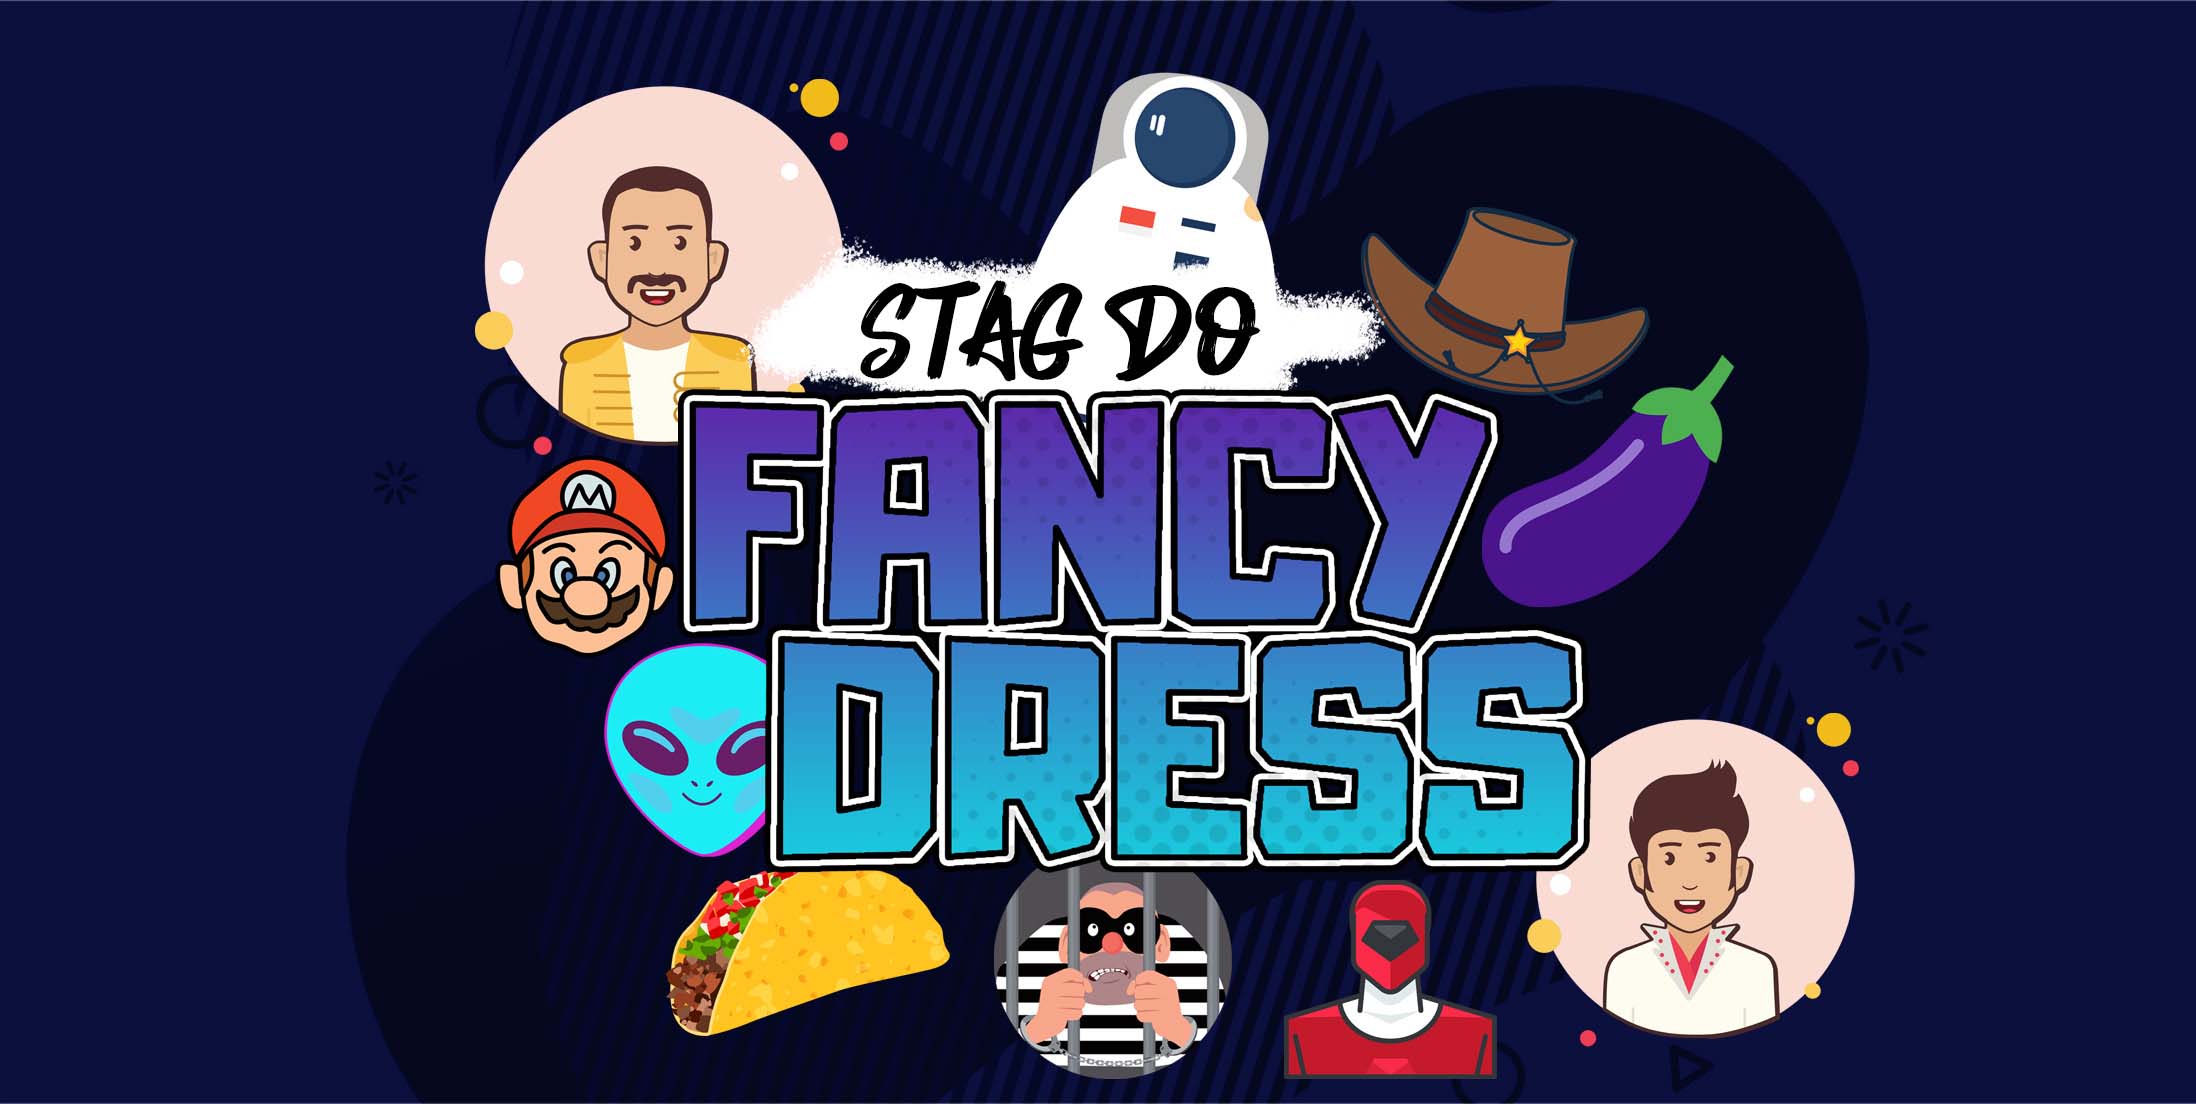 28 Stag Do Fancy Dress Ideas | Stag Do Costumes